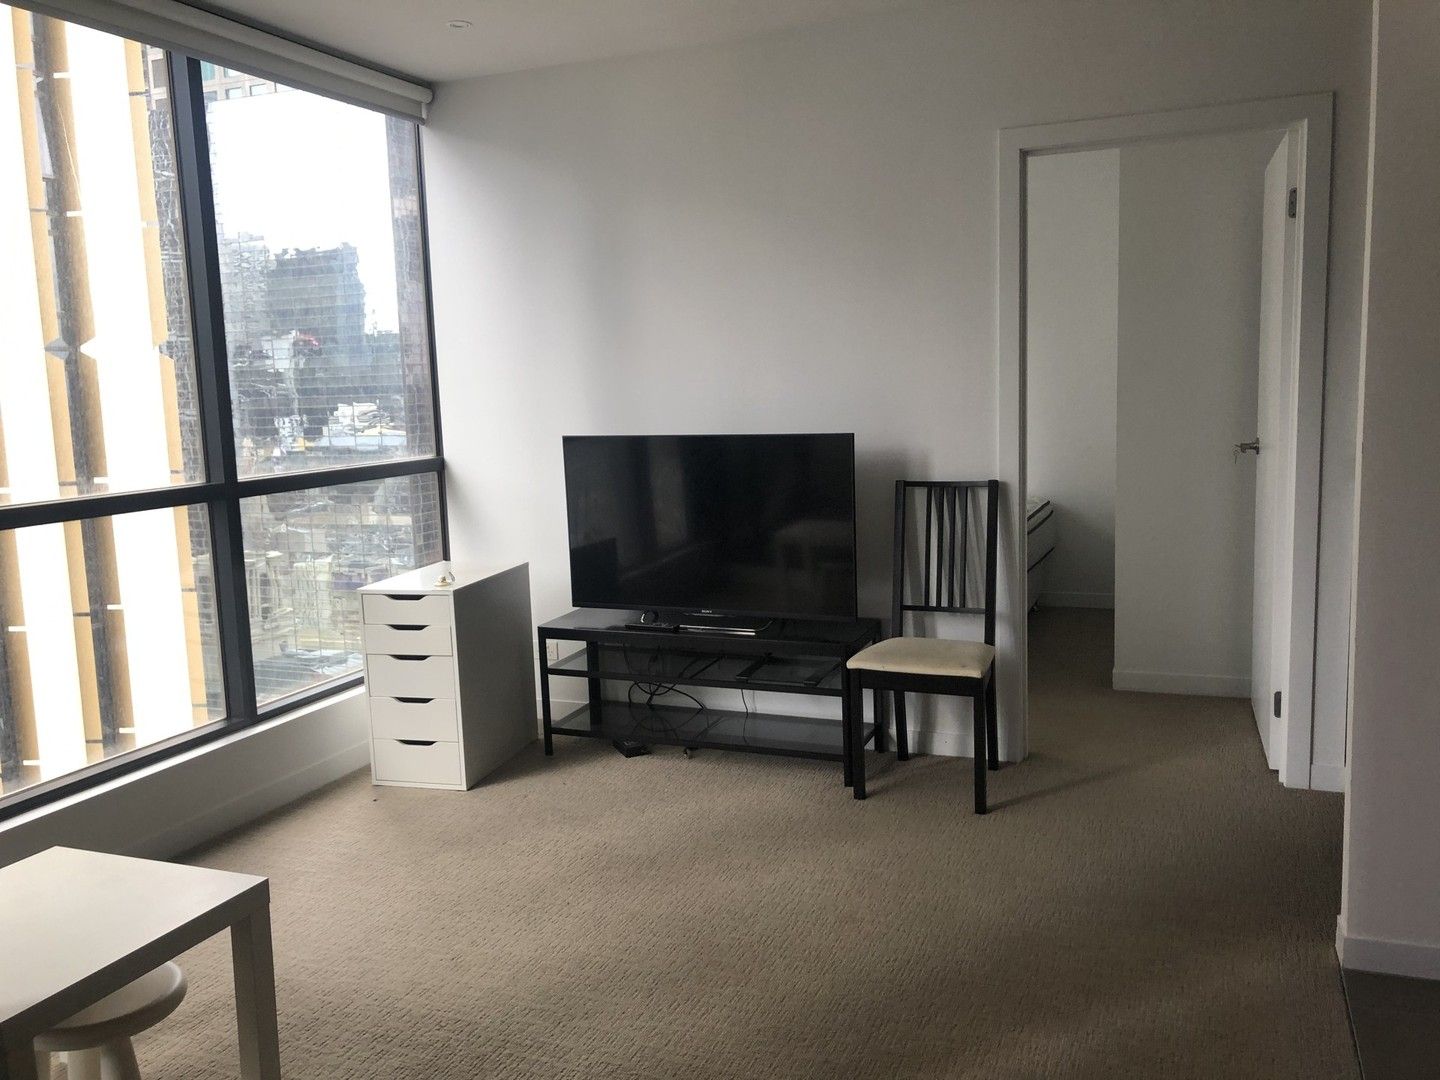 2 bedrooms Apartment / Unit / Flat in 2106/80 Abeckett Street MELBOURNE VIC, 3000